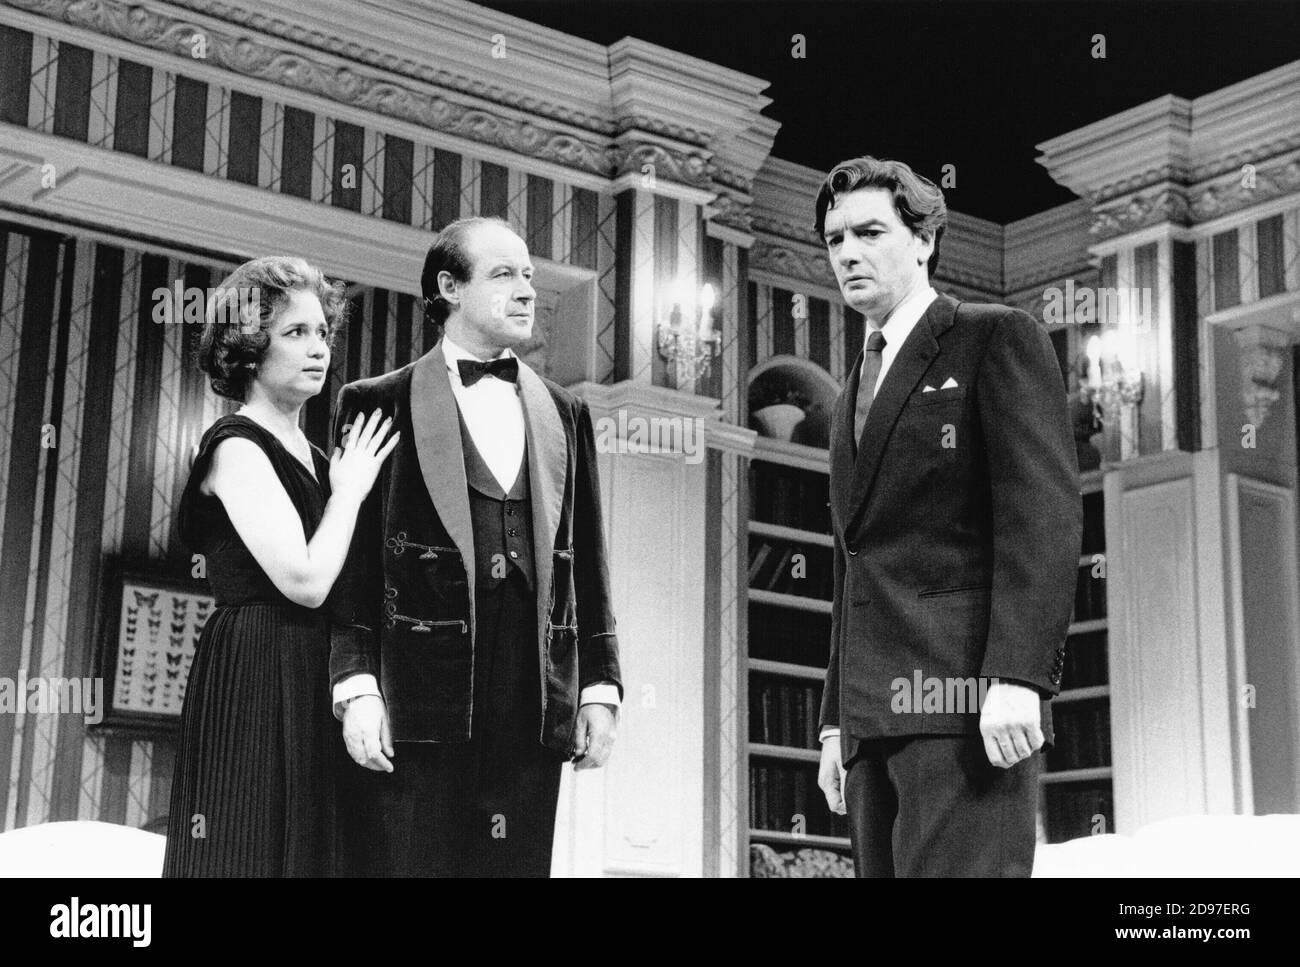 THE COMPLAISANT LOVER  by Graham Greene  design: Michael Pavelka  lighting: Robert Ornbo  director: Richard Olivier  l-r: Susan Penhaligon (Mary Rhodes), David Horovitch (Victor Rhodes), Andrew Hawkins (Clive Root)  Palace Theatre, Watford, England  08/10/1991                 (c) Donald Cooper/Photostage   photos@photostage.co.uk   ref/BW-P-327-31 Stock Photo